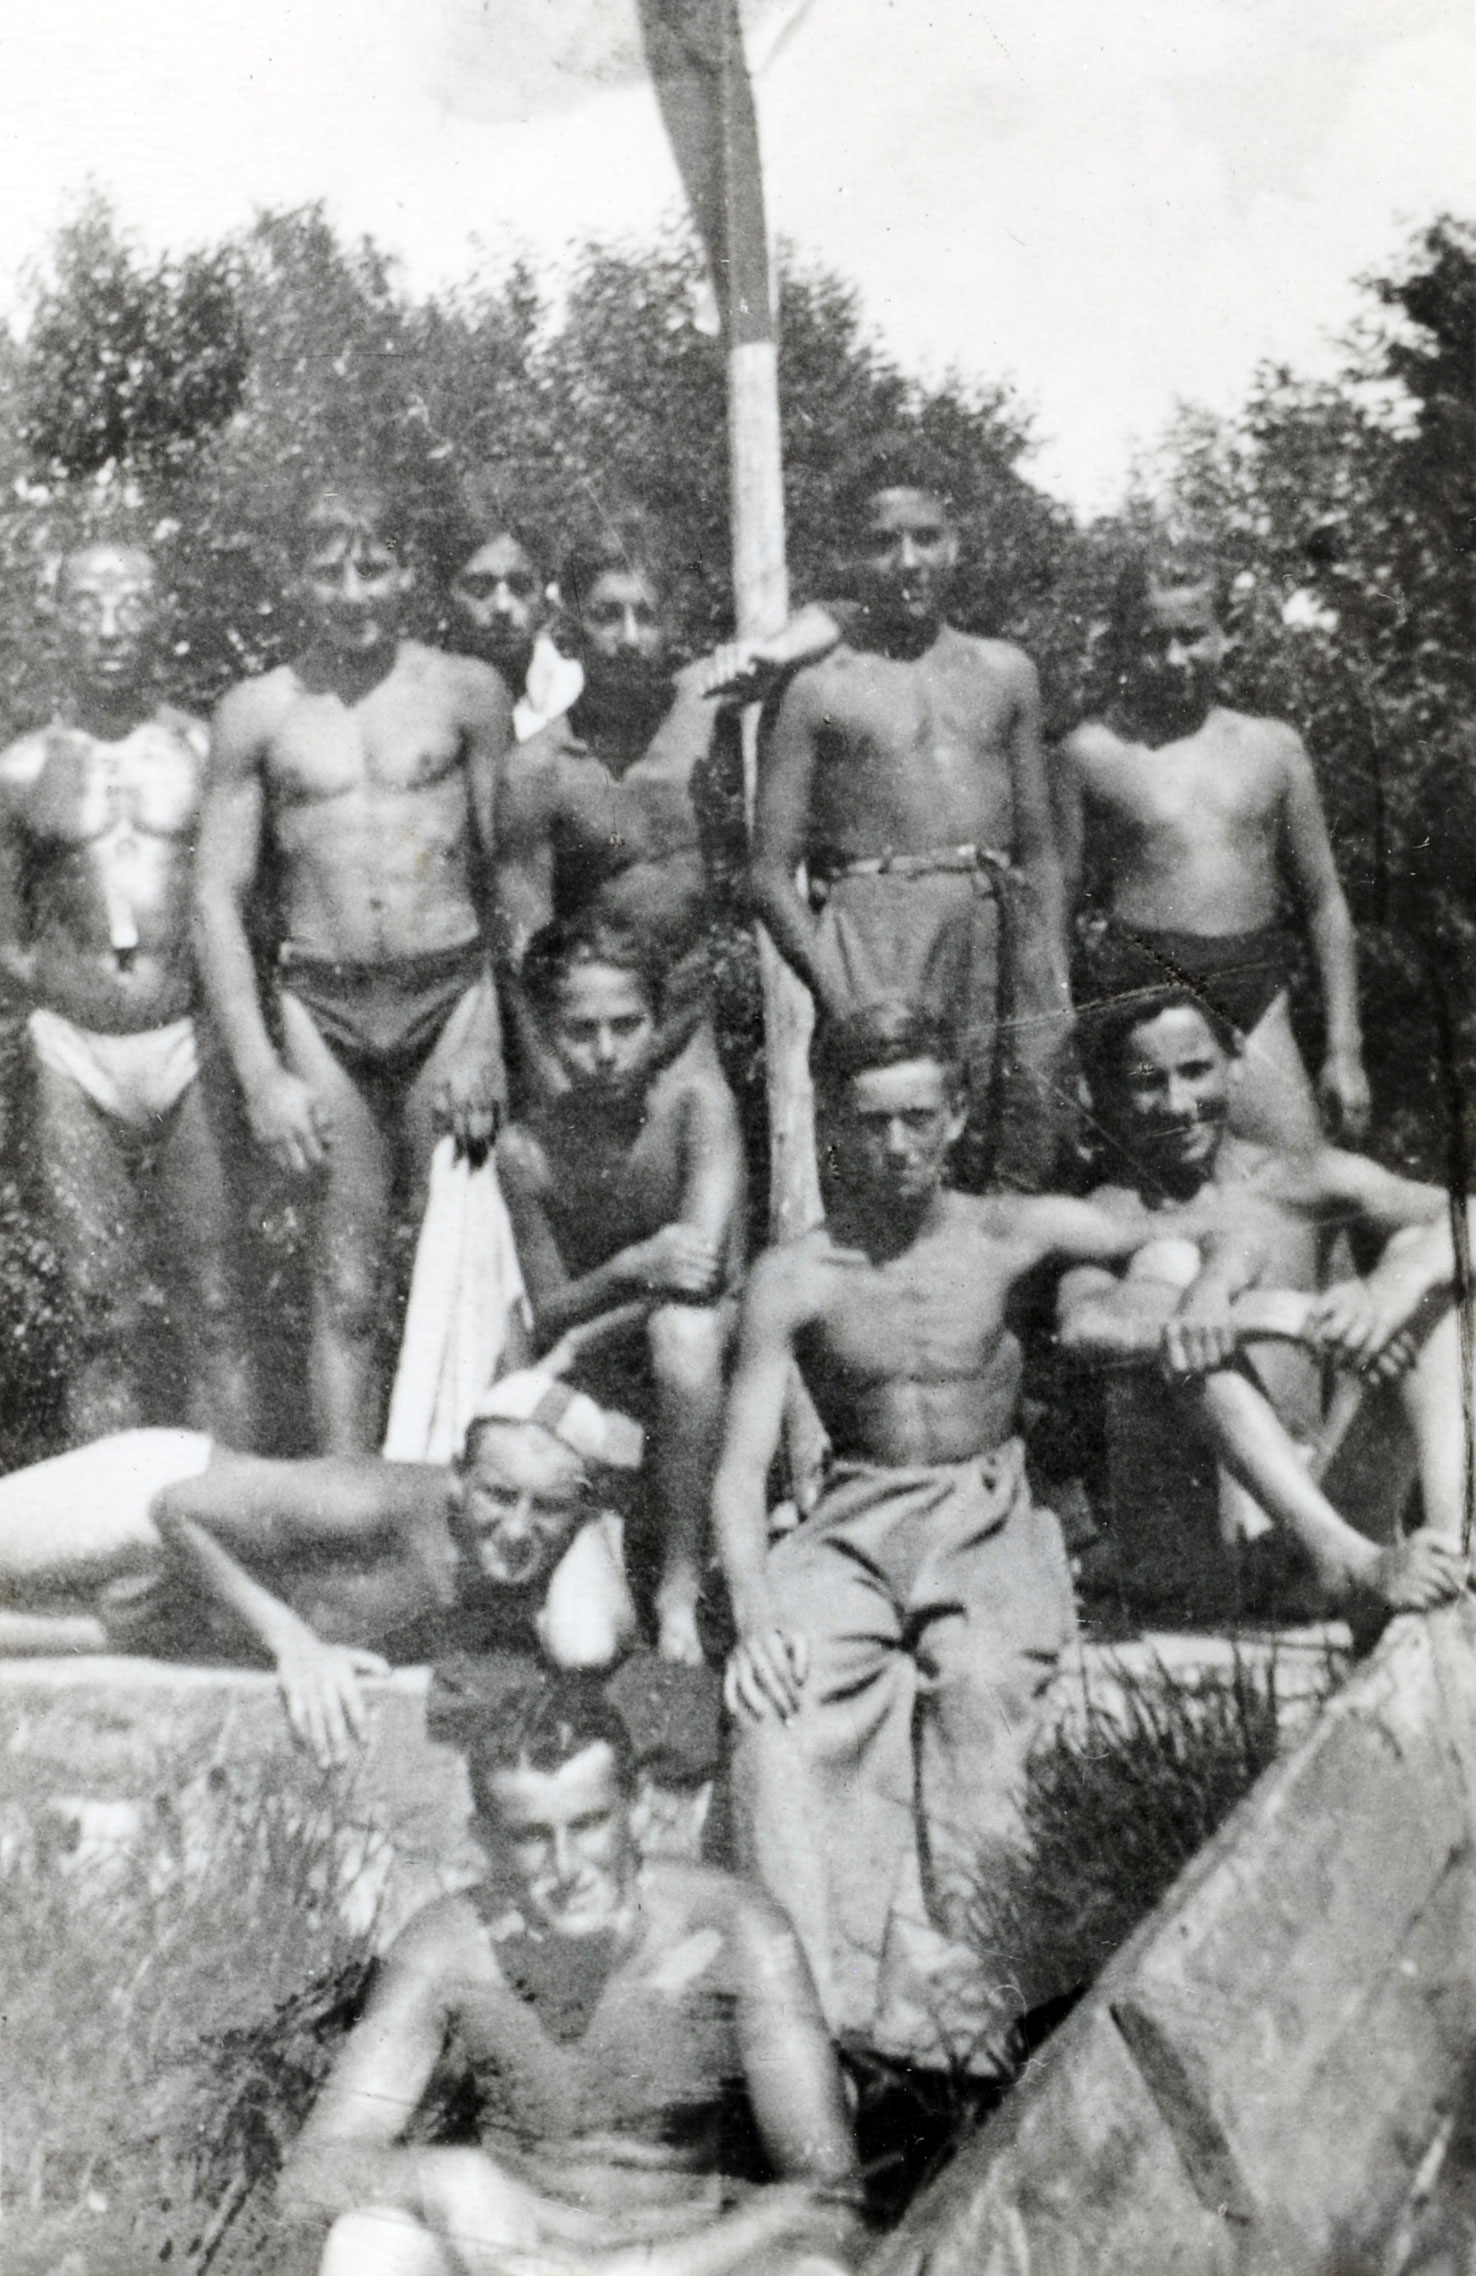 Samek-Samuel Tytelman (standing, second from left) together with members of the Maccabi Warsaw swim team, summer 1939. Samek was murdered in the Holocaust